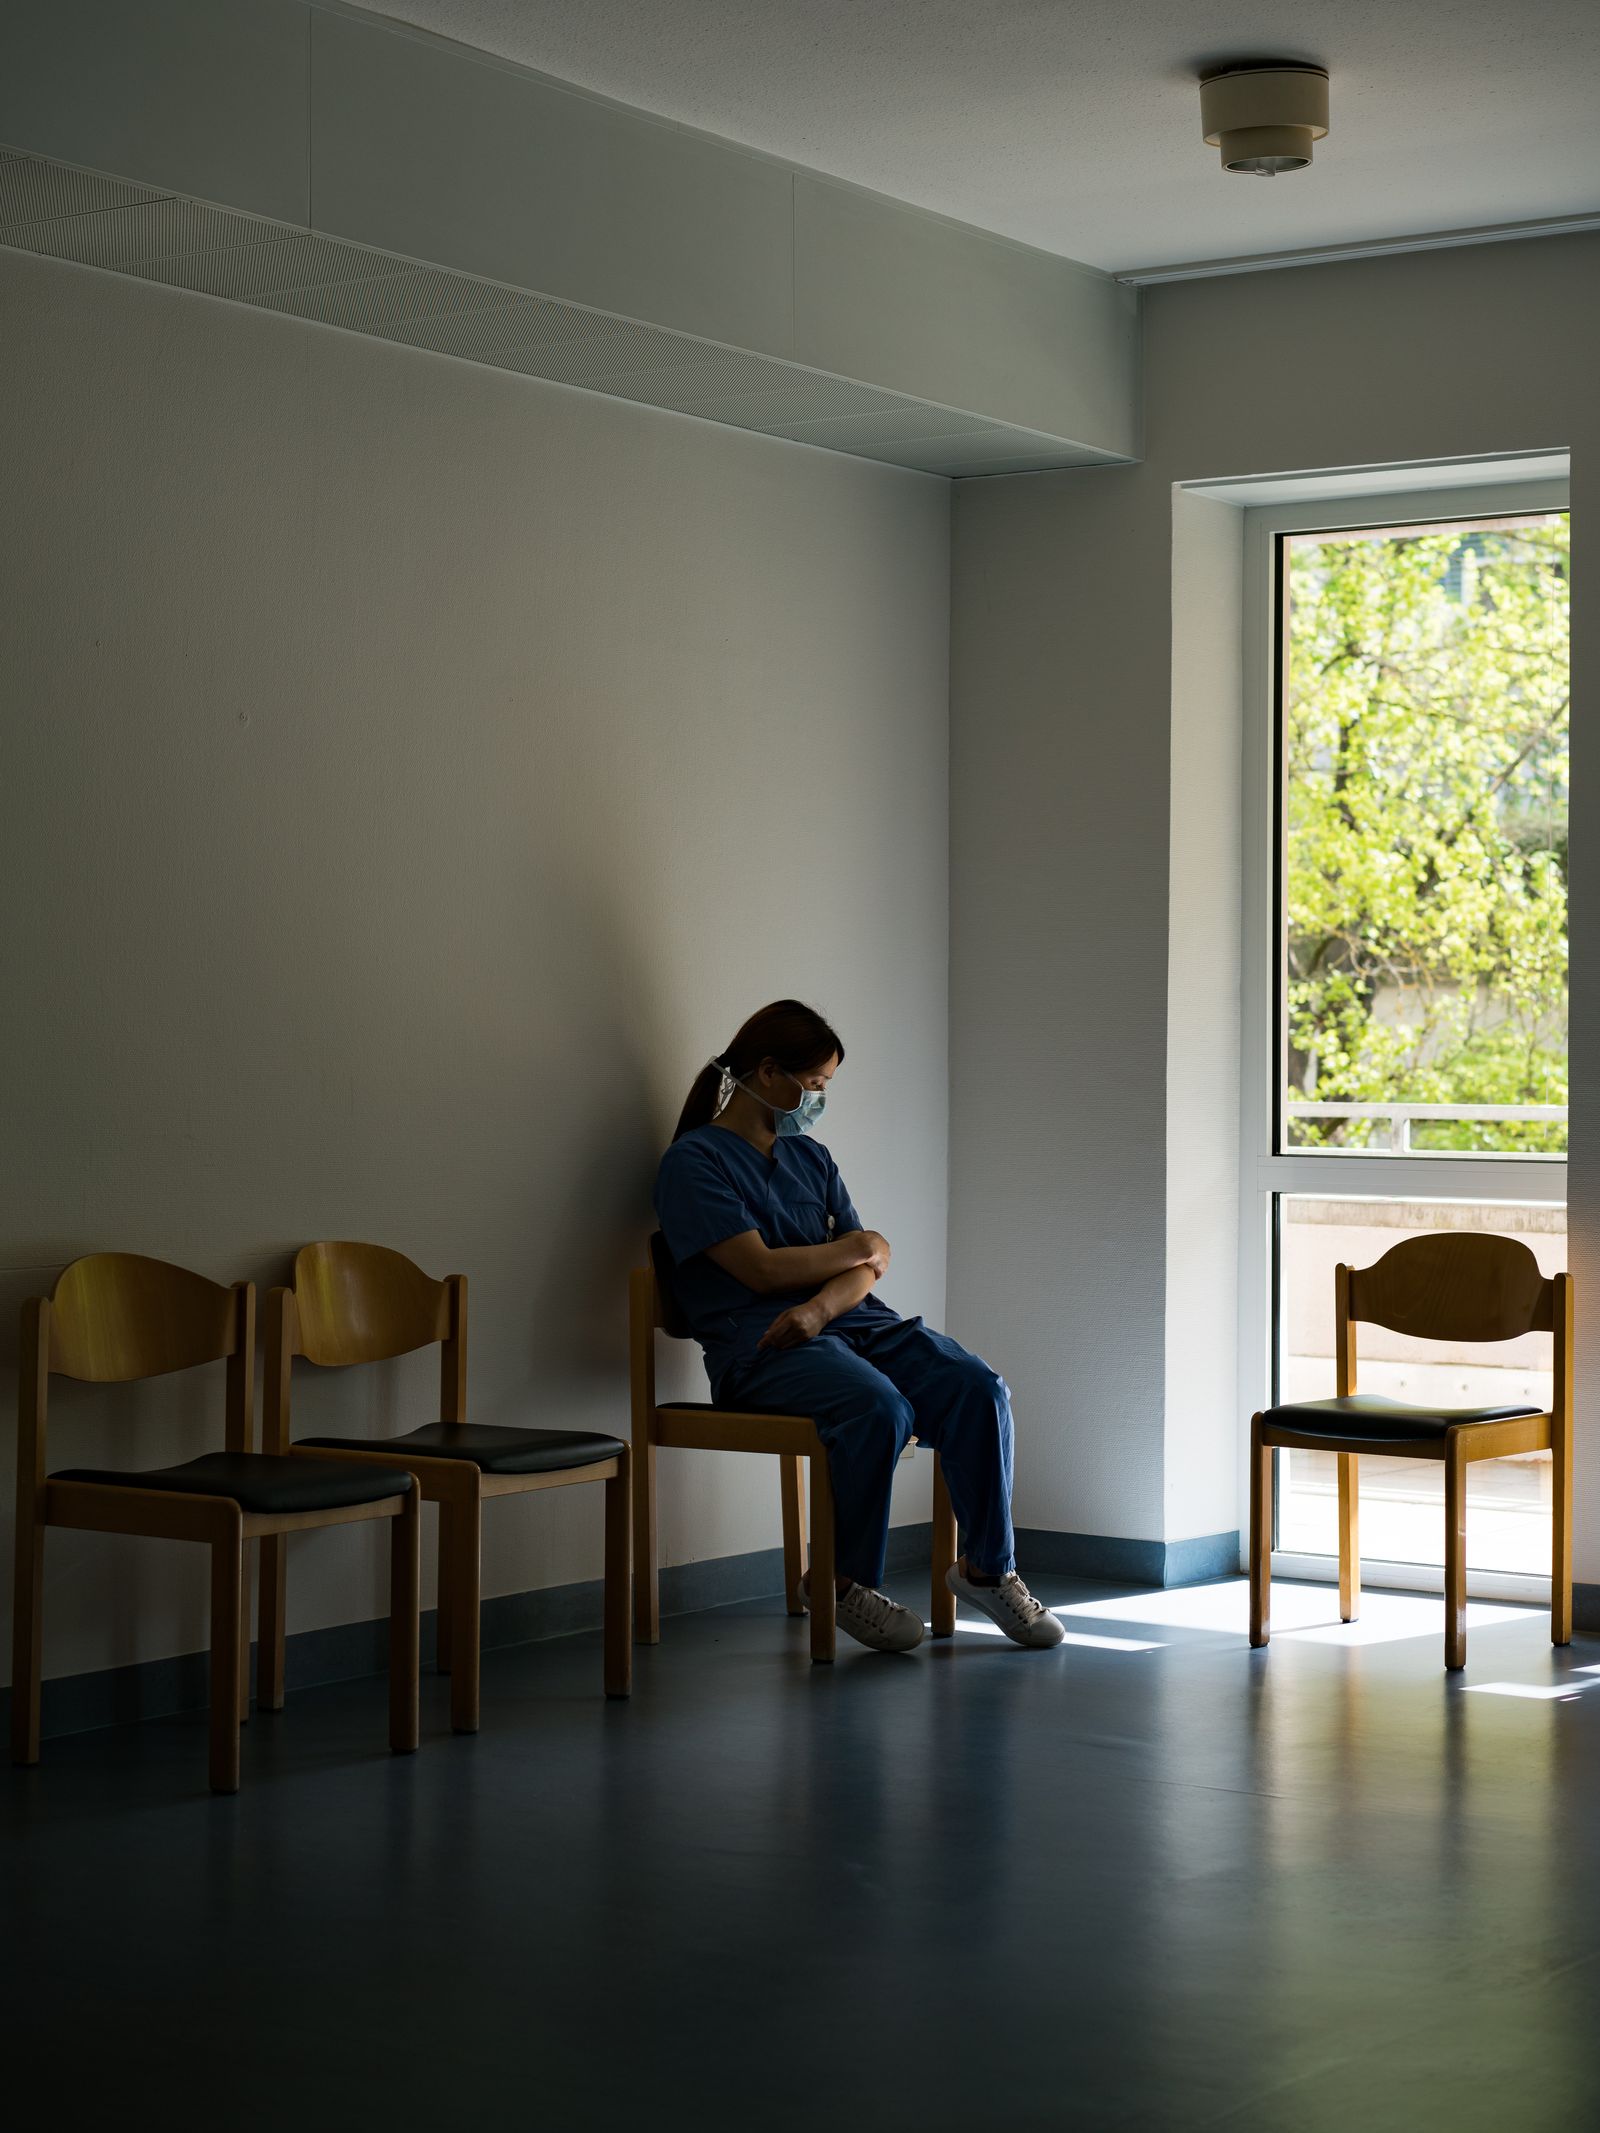 © Patrick Junker & Jonathan Terlinden - Germany, Stuttgart, Marienhospital, April 17, 2020: A nurse is waiting to be tested for Covid-19.